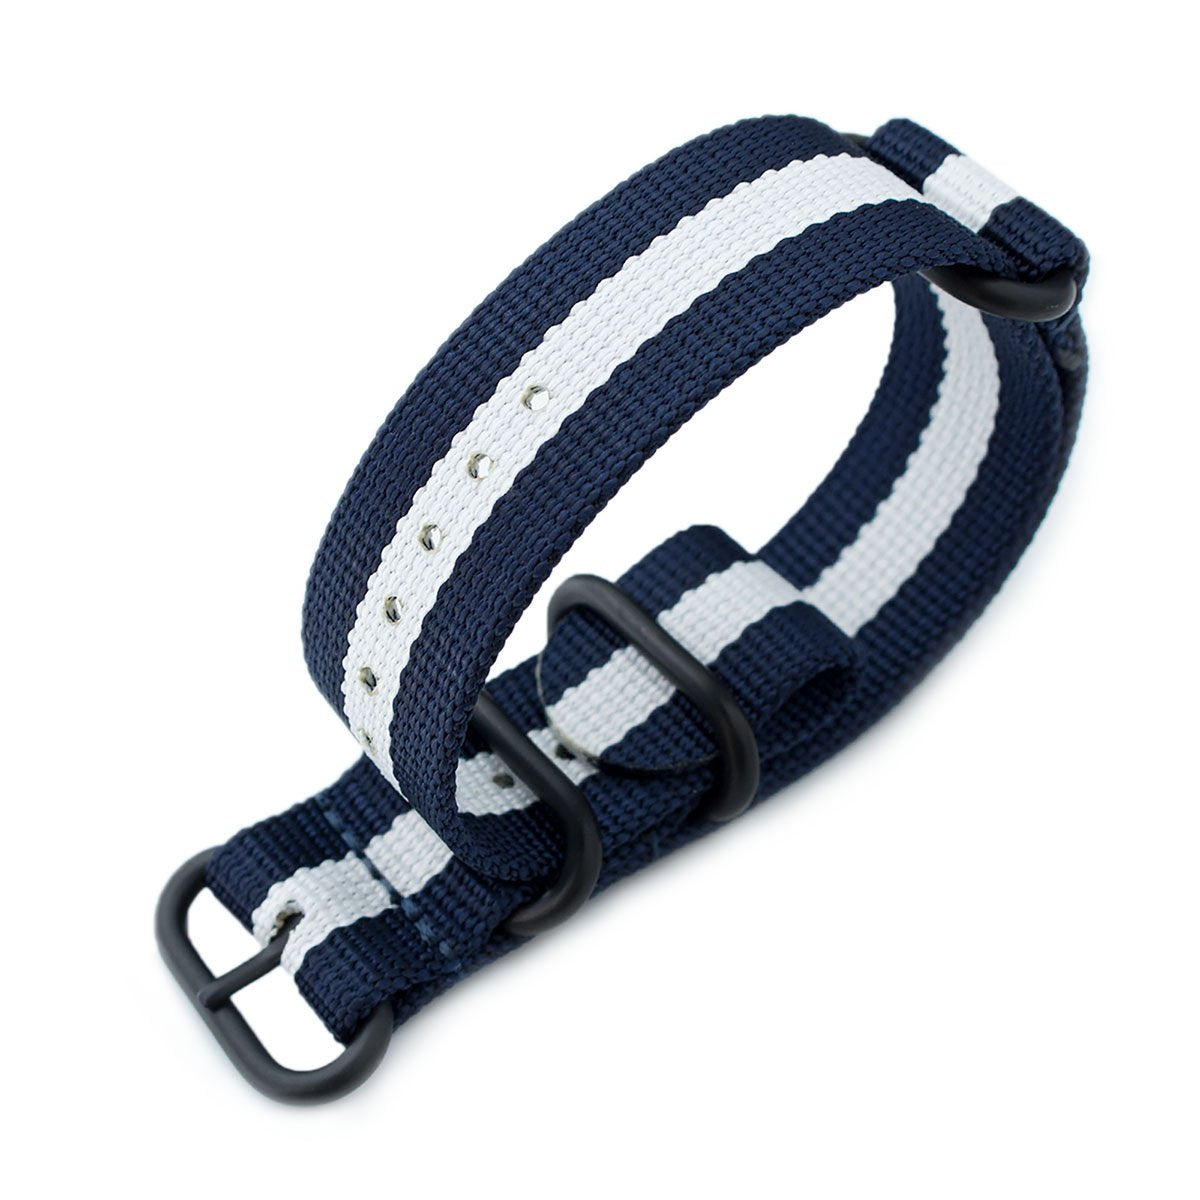 MiLTAT 22mm 3 Rings G10 Zulu Watch Strap Ballistic Nylon Armband Navy Blue &amp; White PVD Black Buckle Strapcode Watch Bands